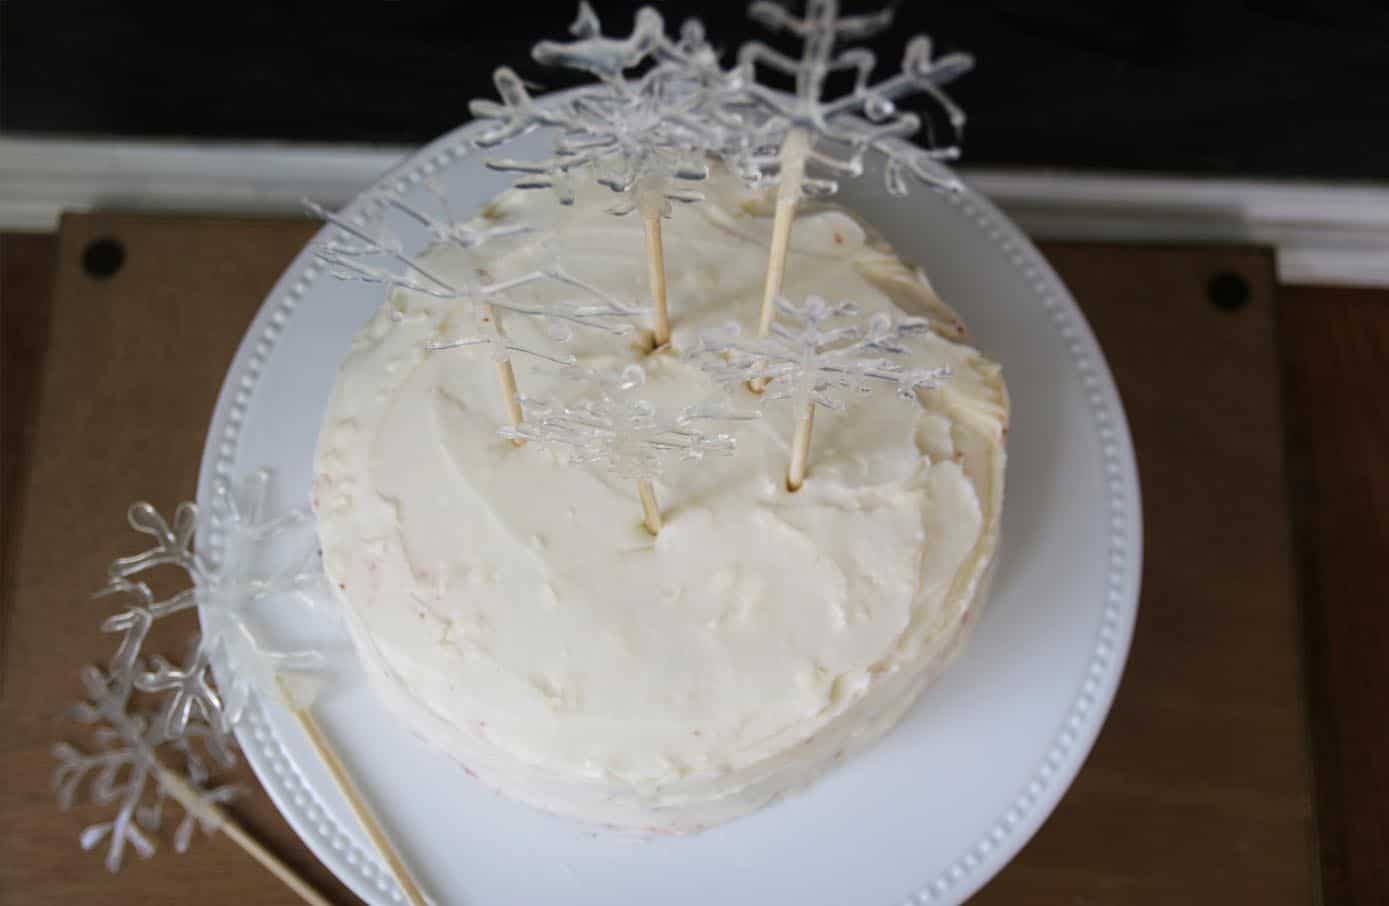 Snowflake cake toppers inserted in a white frosted cake on a white plate